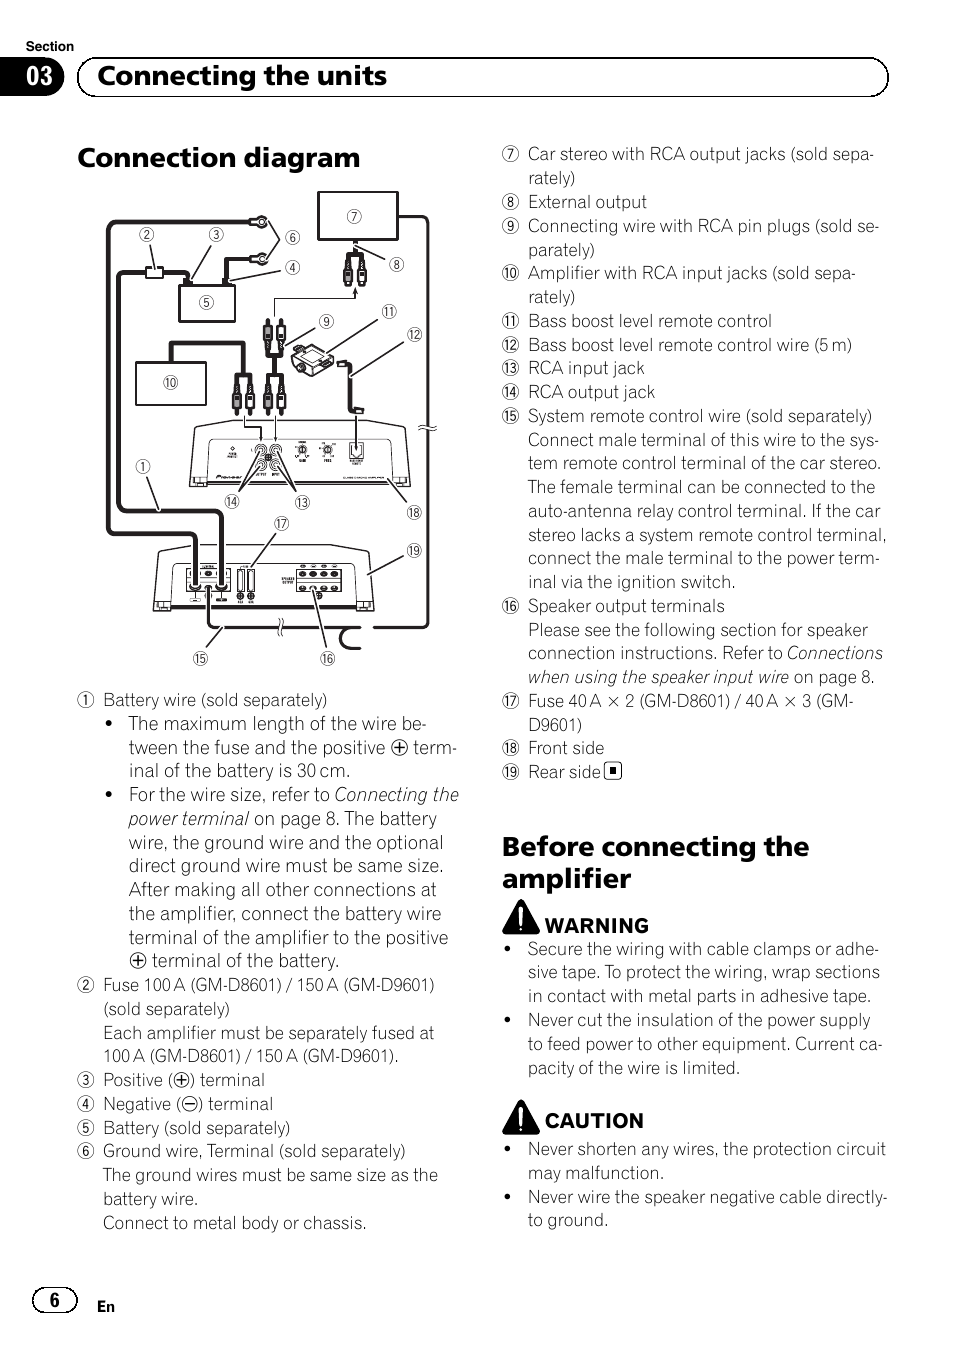 Connection diagram, Before connecting the amplifier, 03 connecting the  units | Pioneer GM-D8601 User Manual | Page 6 / 92 | Original mode